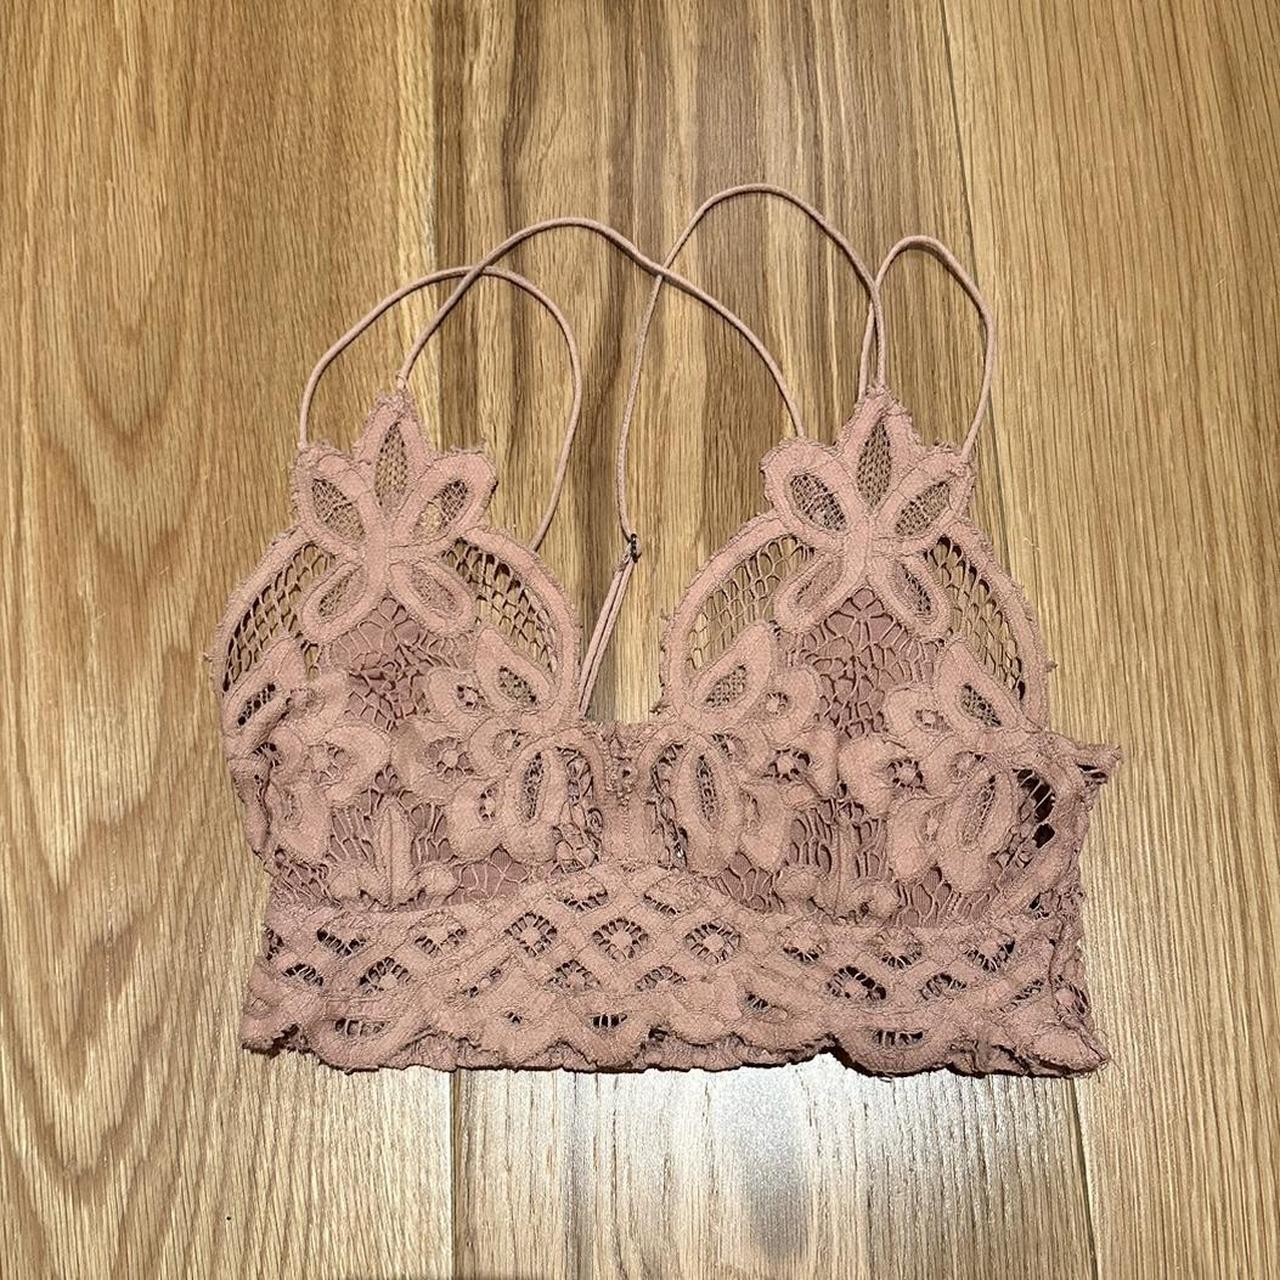 light pink free people cami/bralette! marked as a xs - Depop